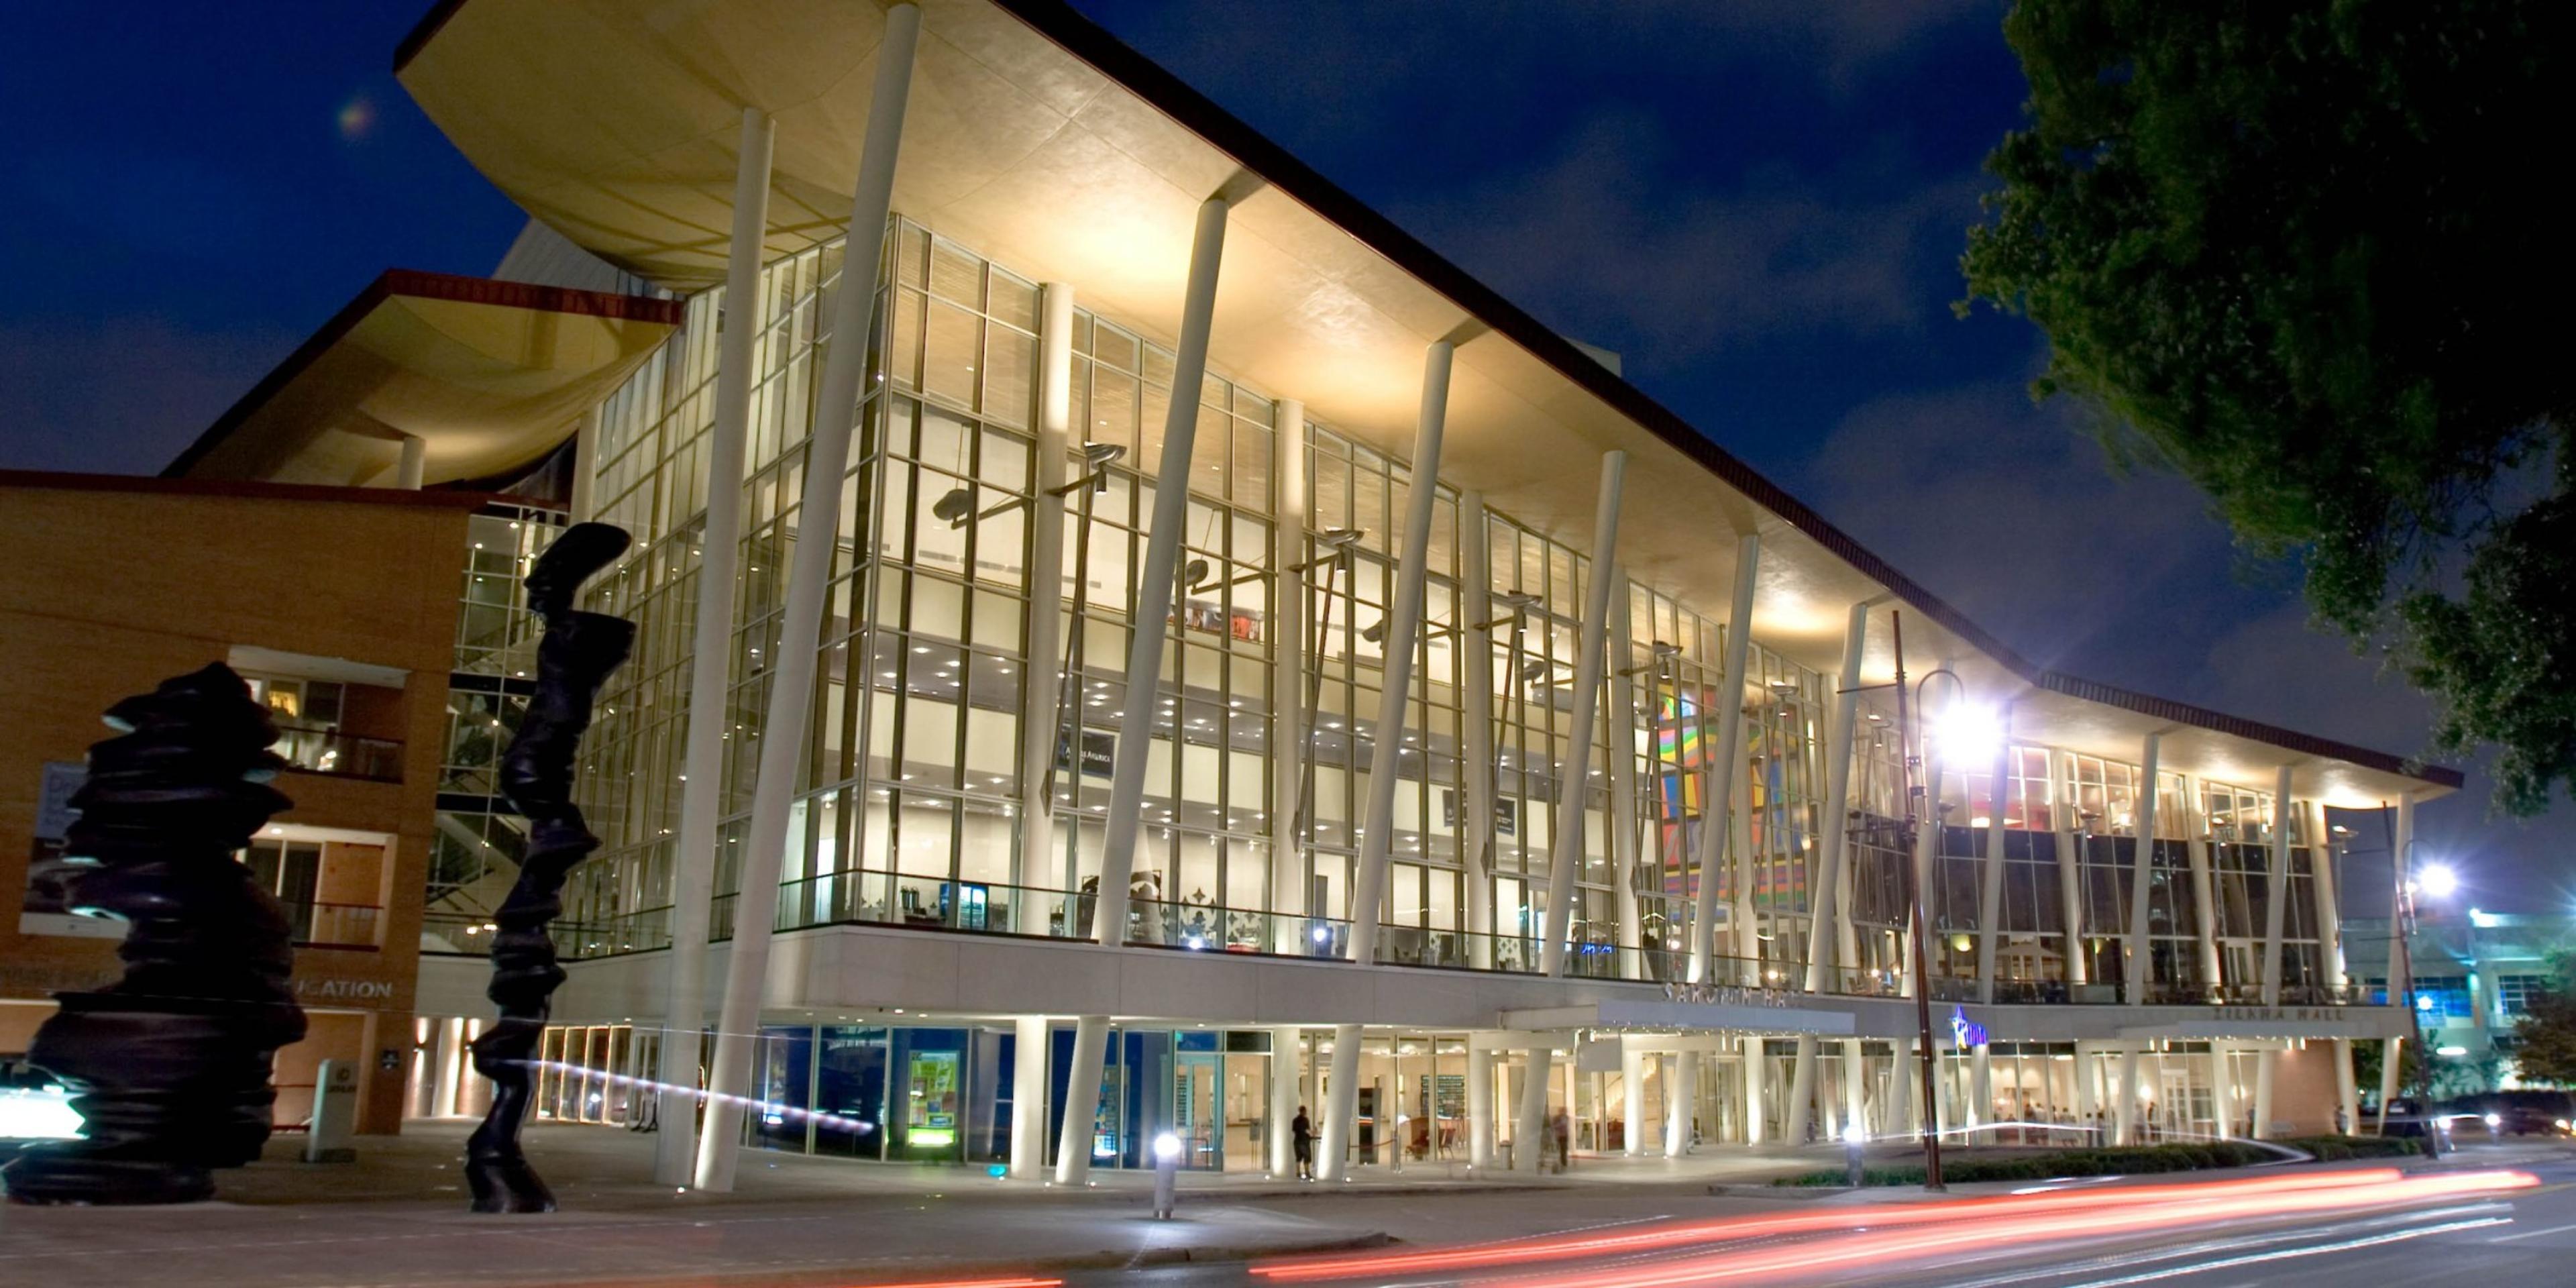 The Hobby Center for the Performing Arts